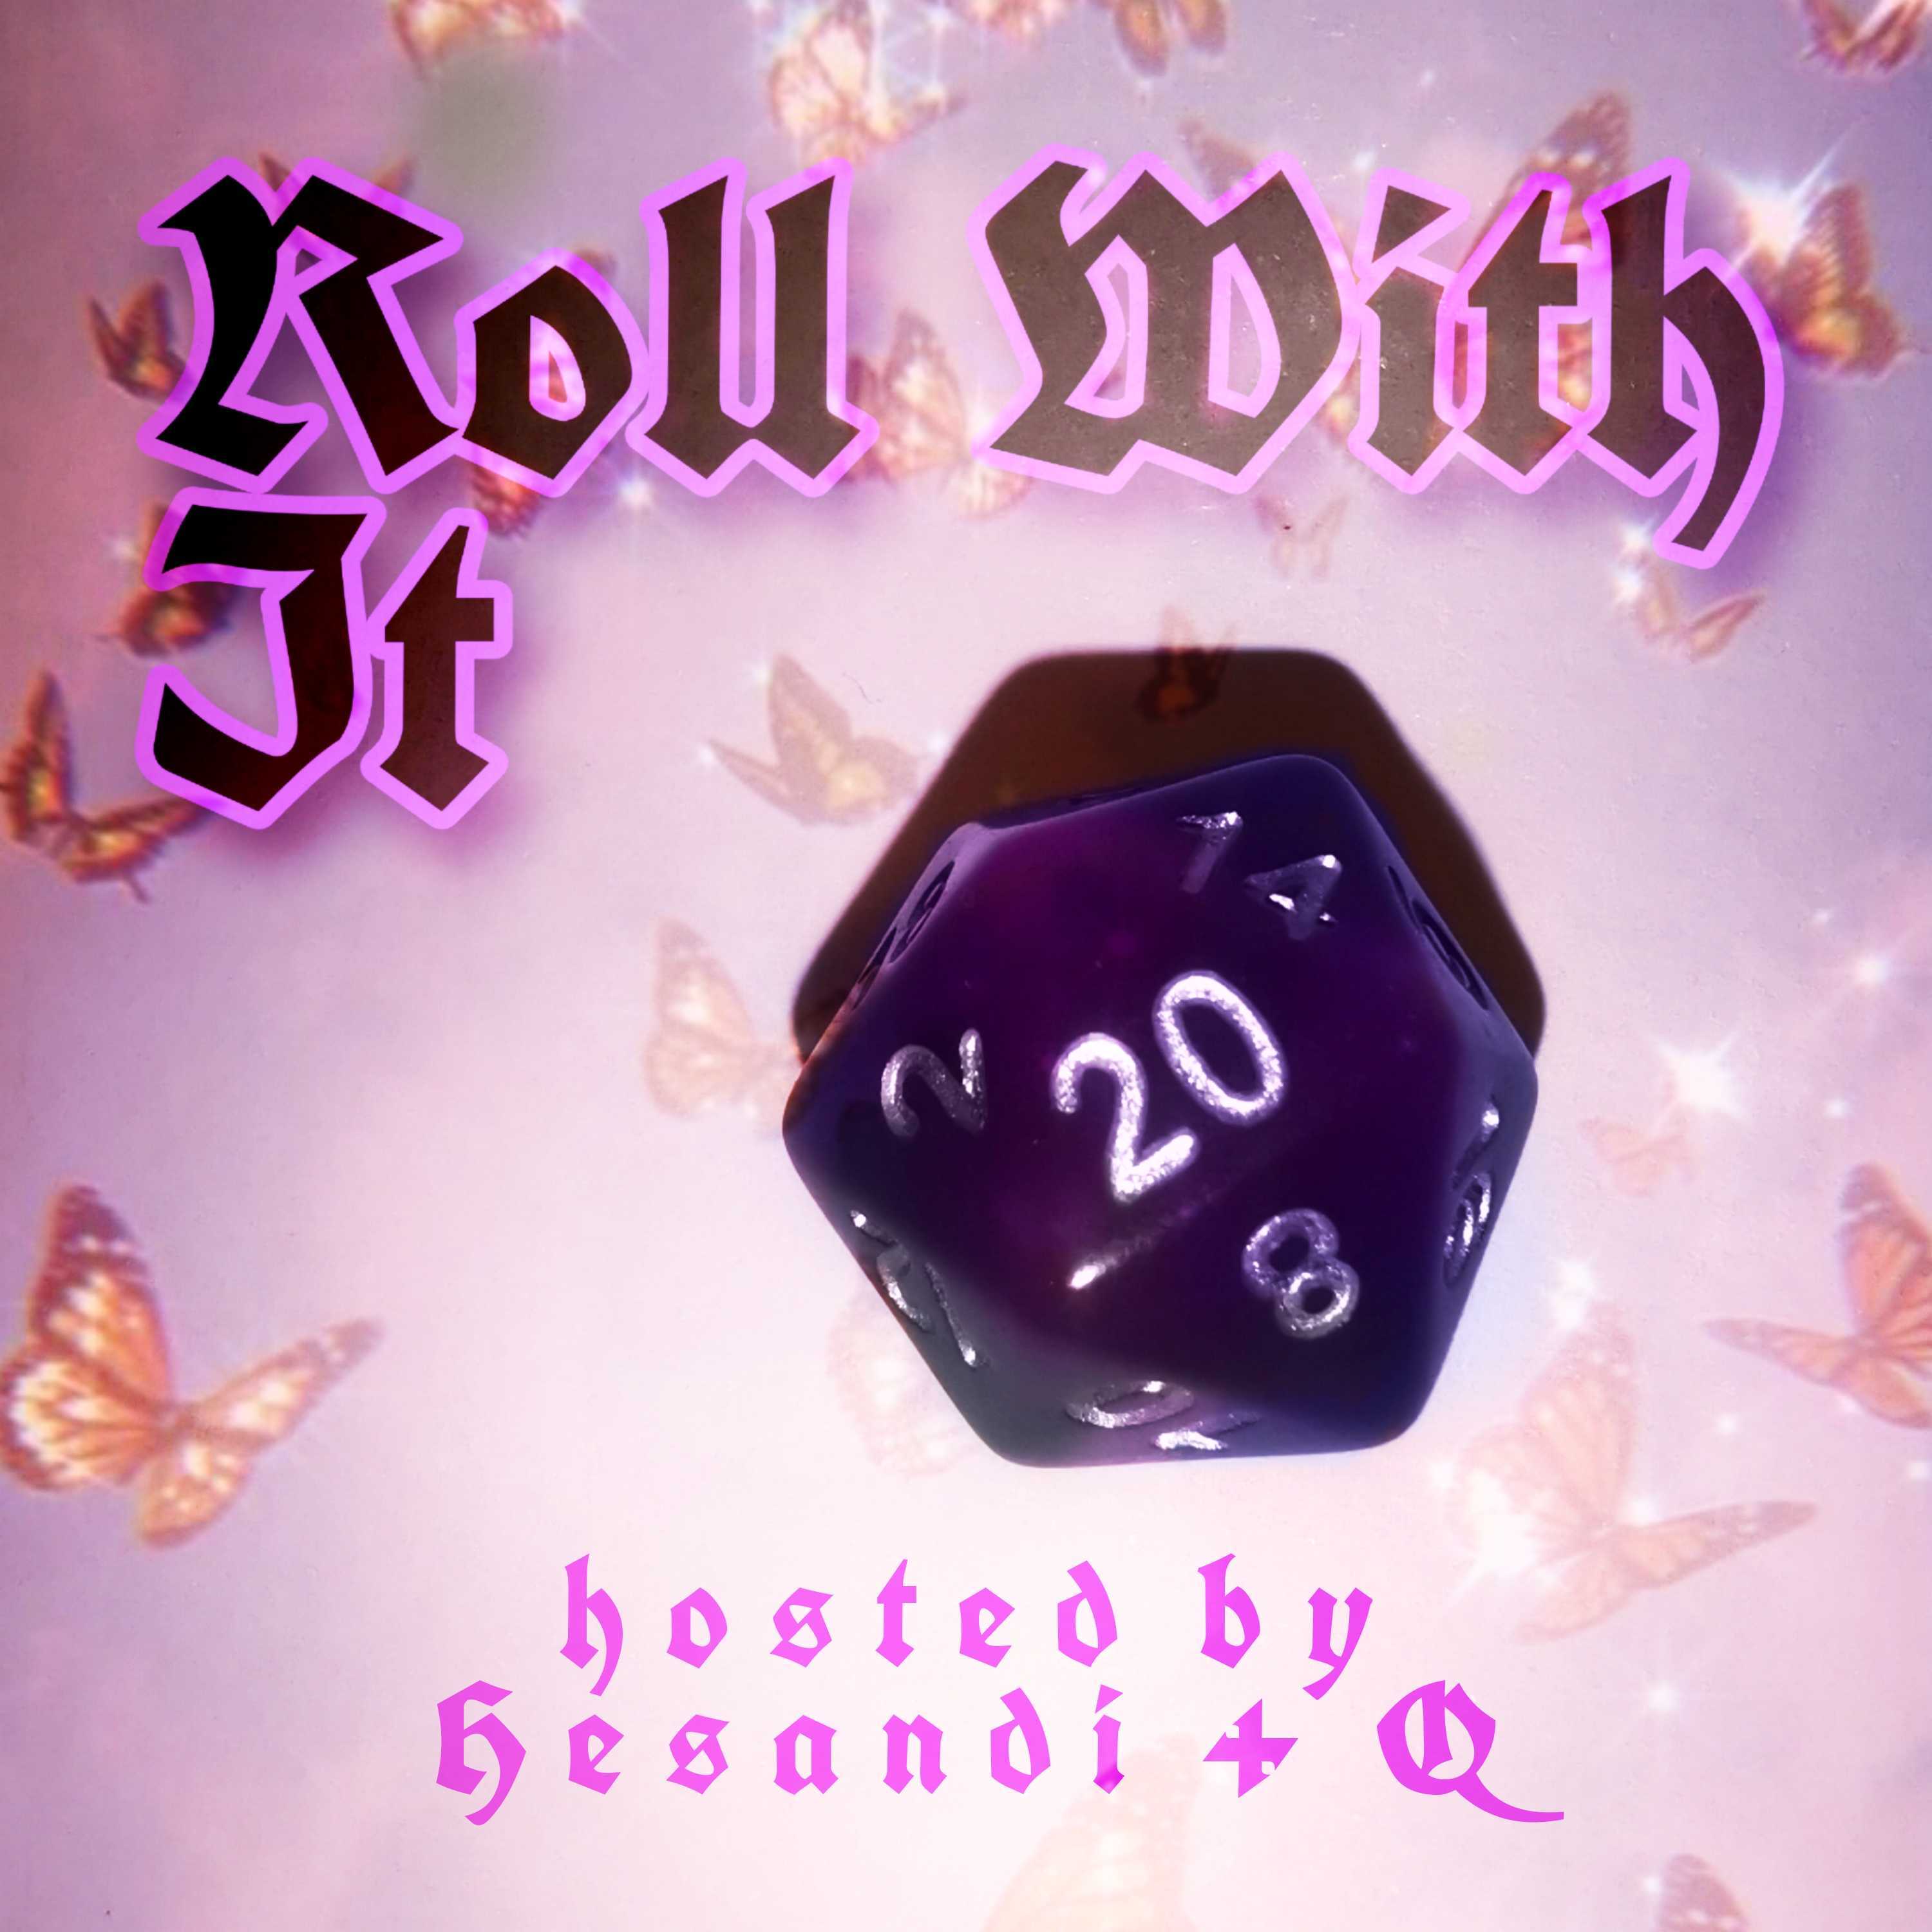 Roll With It logo.